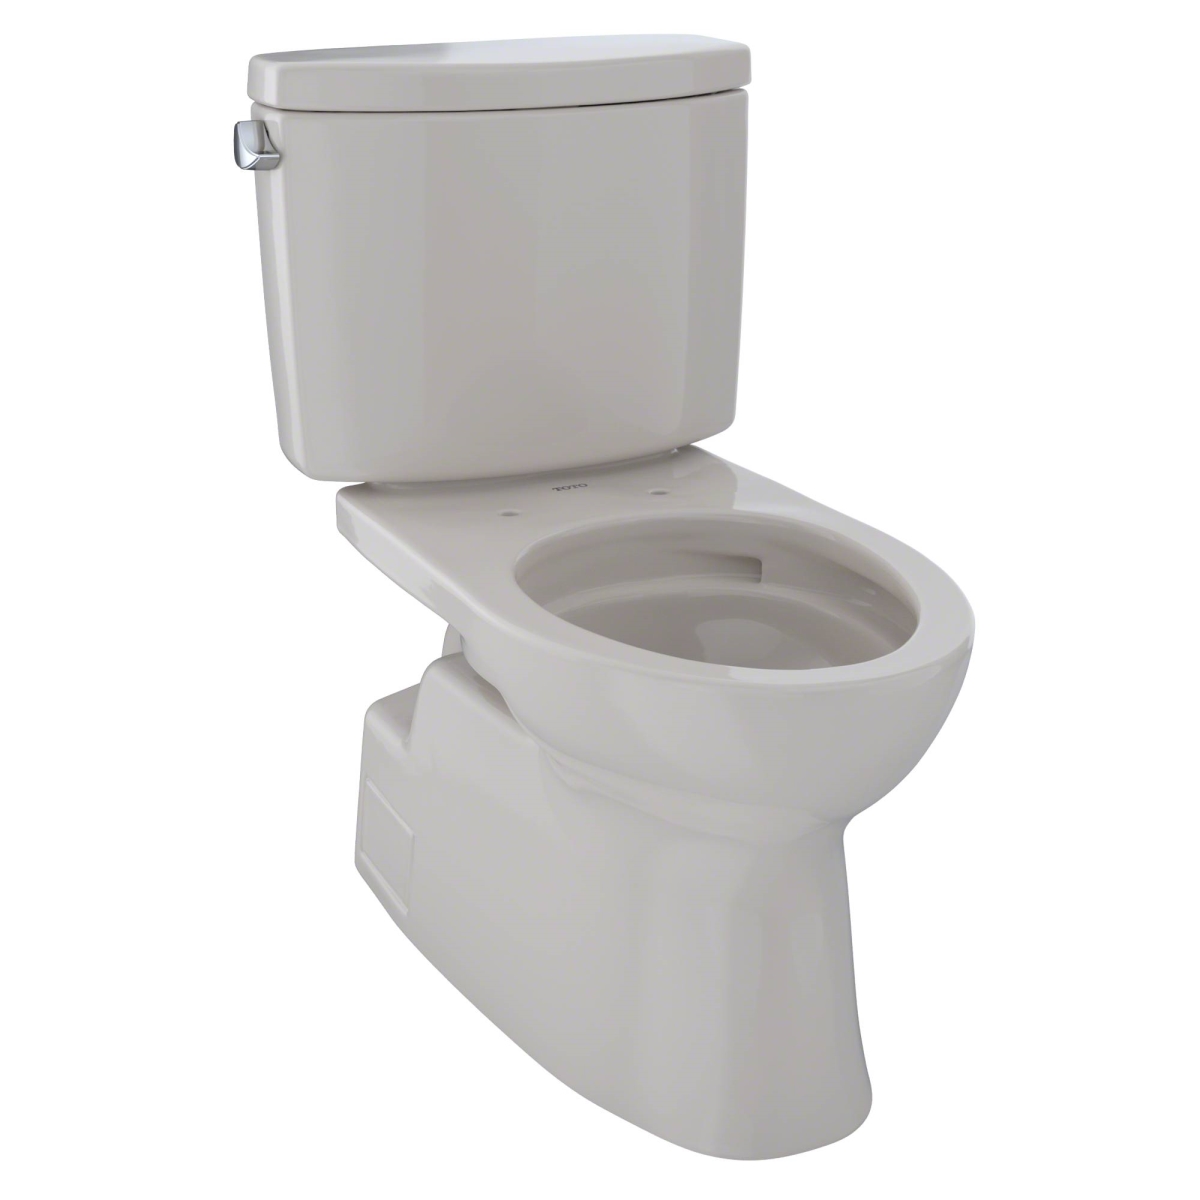 Cst474cefg-12 Elongated 1.28 Gpf Universal Height Skirted Design Toilet With Cefiontect, Sedona Beige